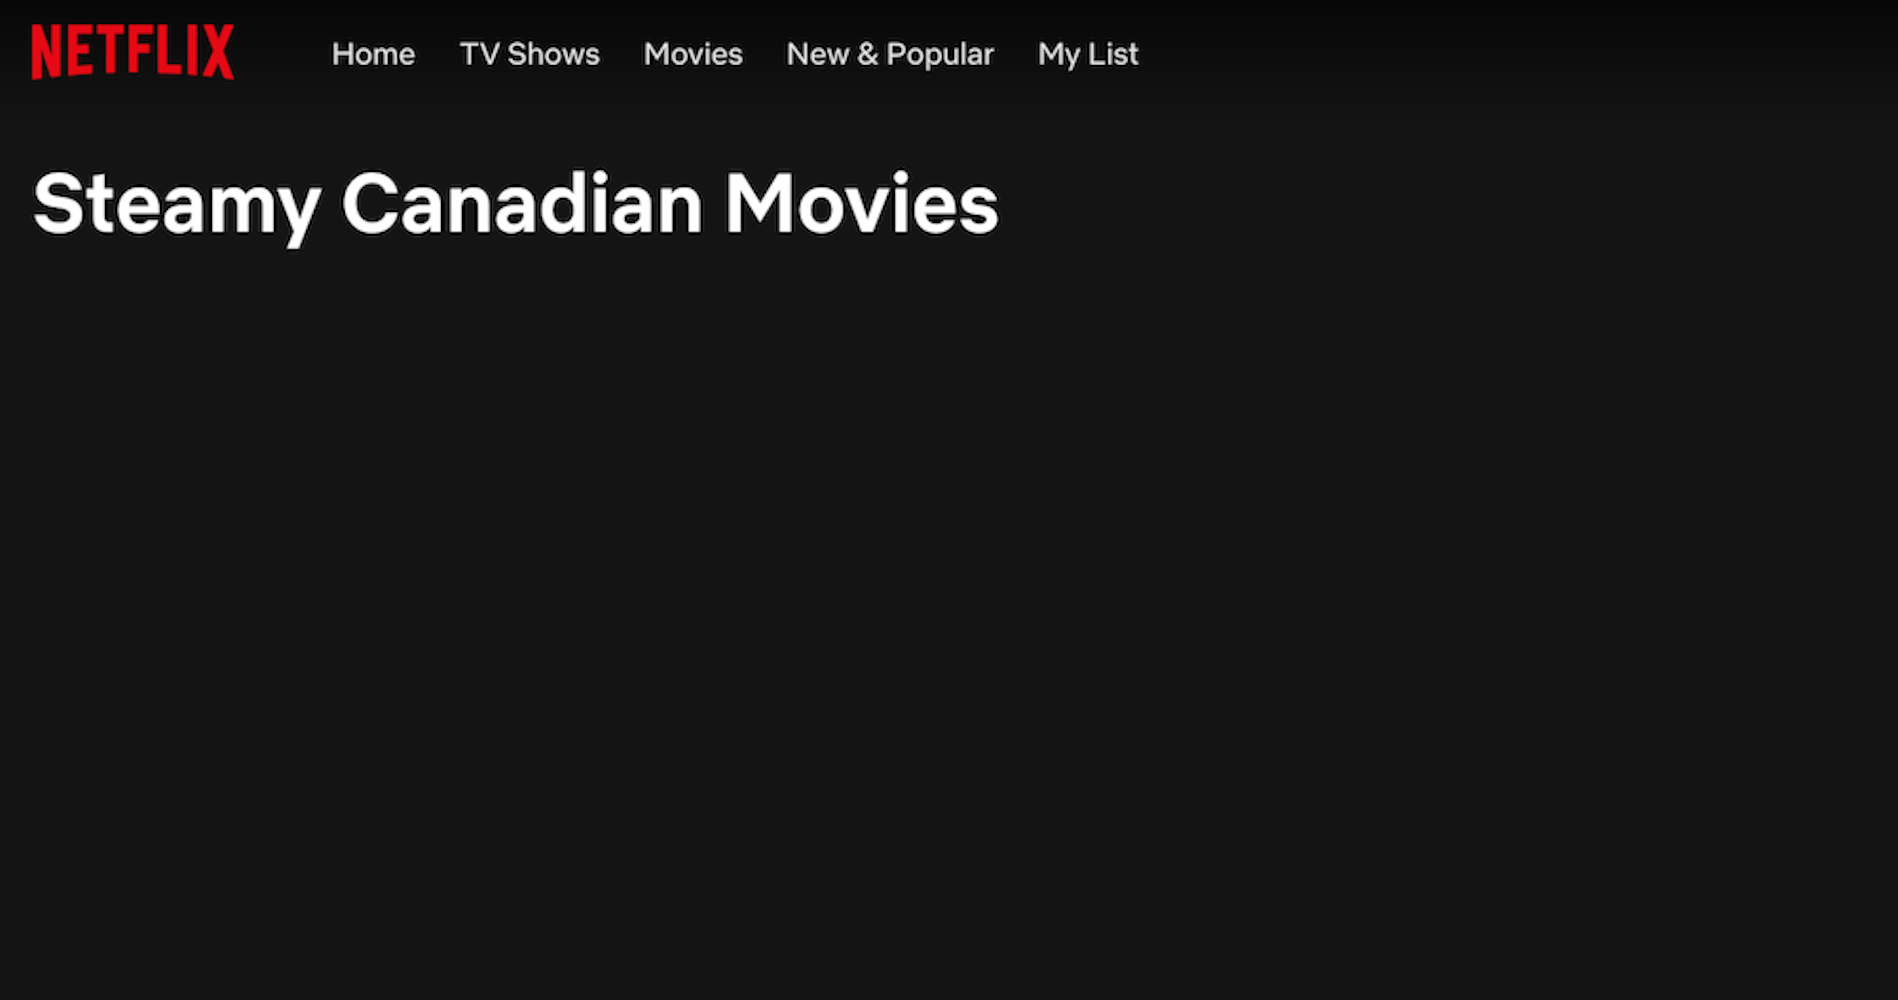 One porn on netflix category is steamy canadian movies